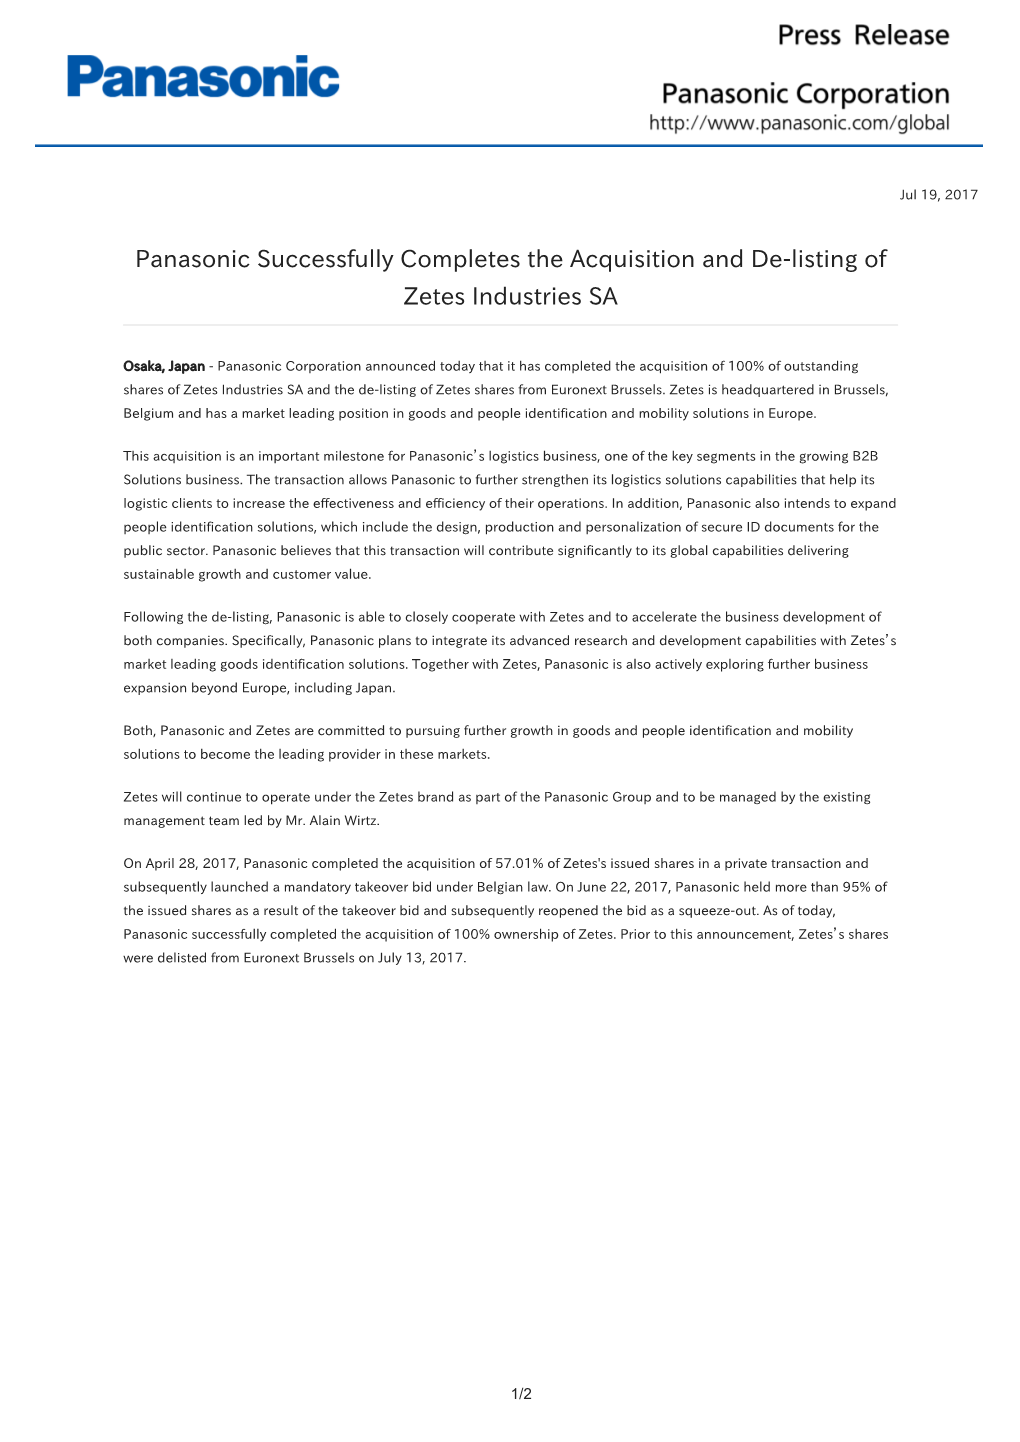 Panasonic Successfully Completes the Acquisition and De-Listing of Zetes Industries SA